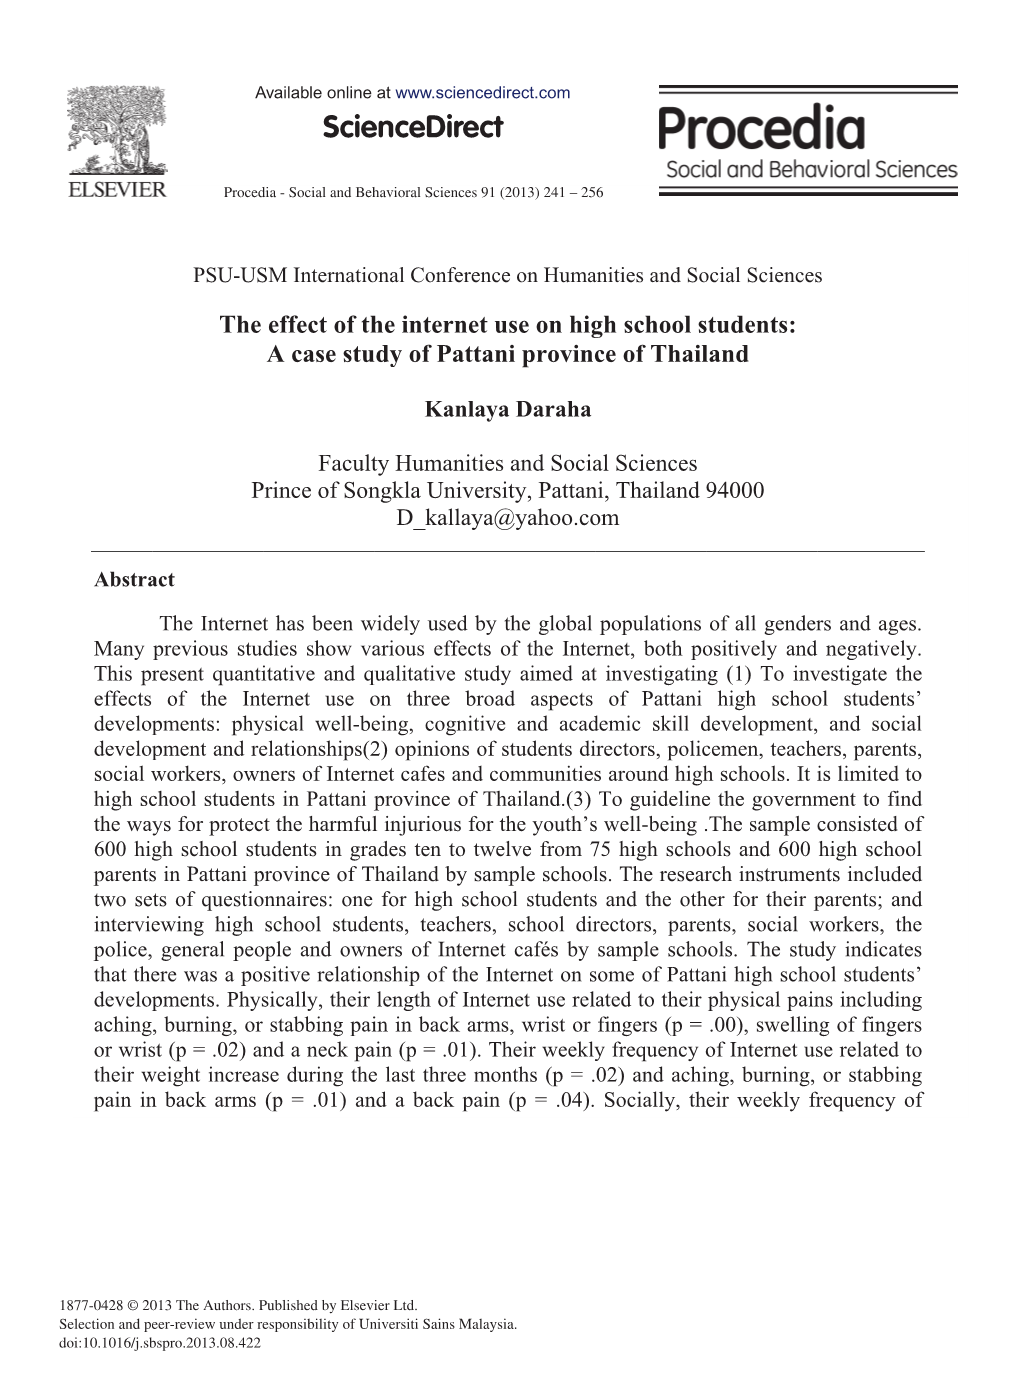 The Effect of the Internet Use on High School Students: a Case Study of Pattani Province of Thailand